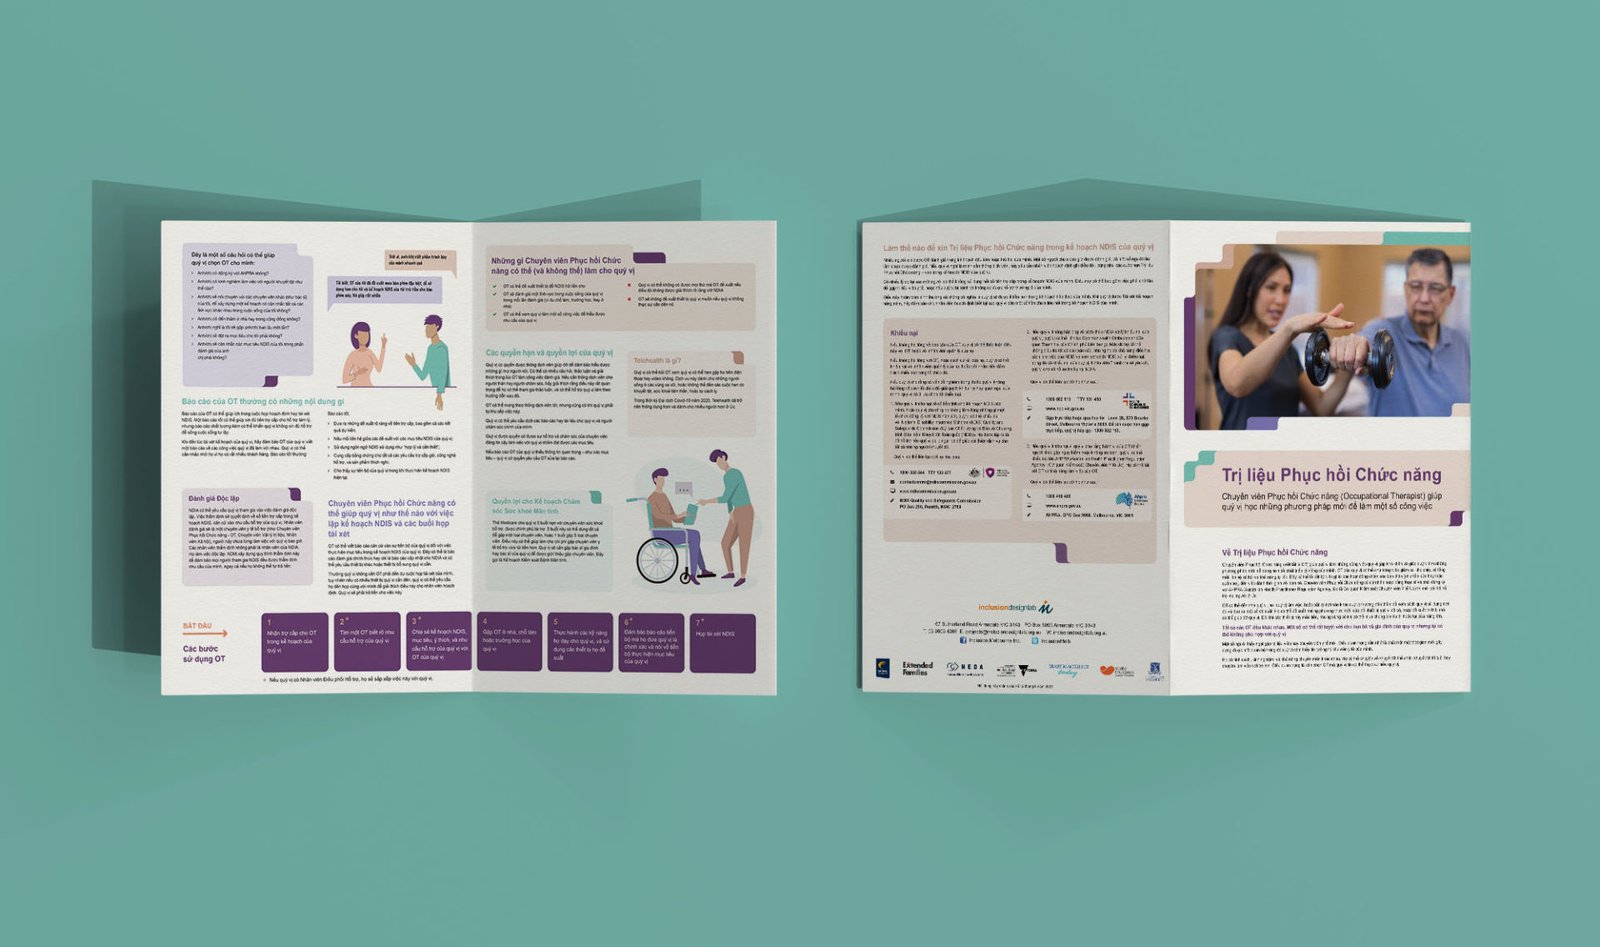 The front and back of the 'Occupational Therapy' brochure in Vietnamese language